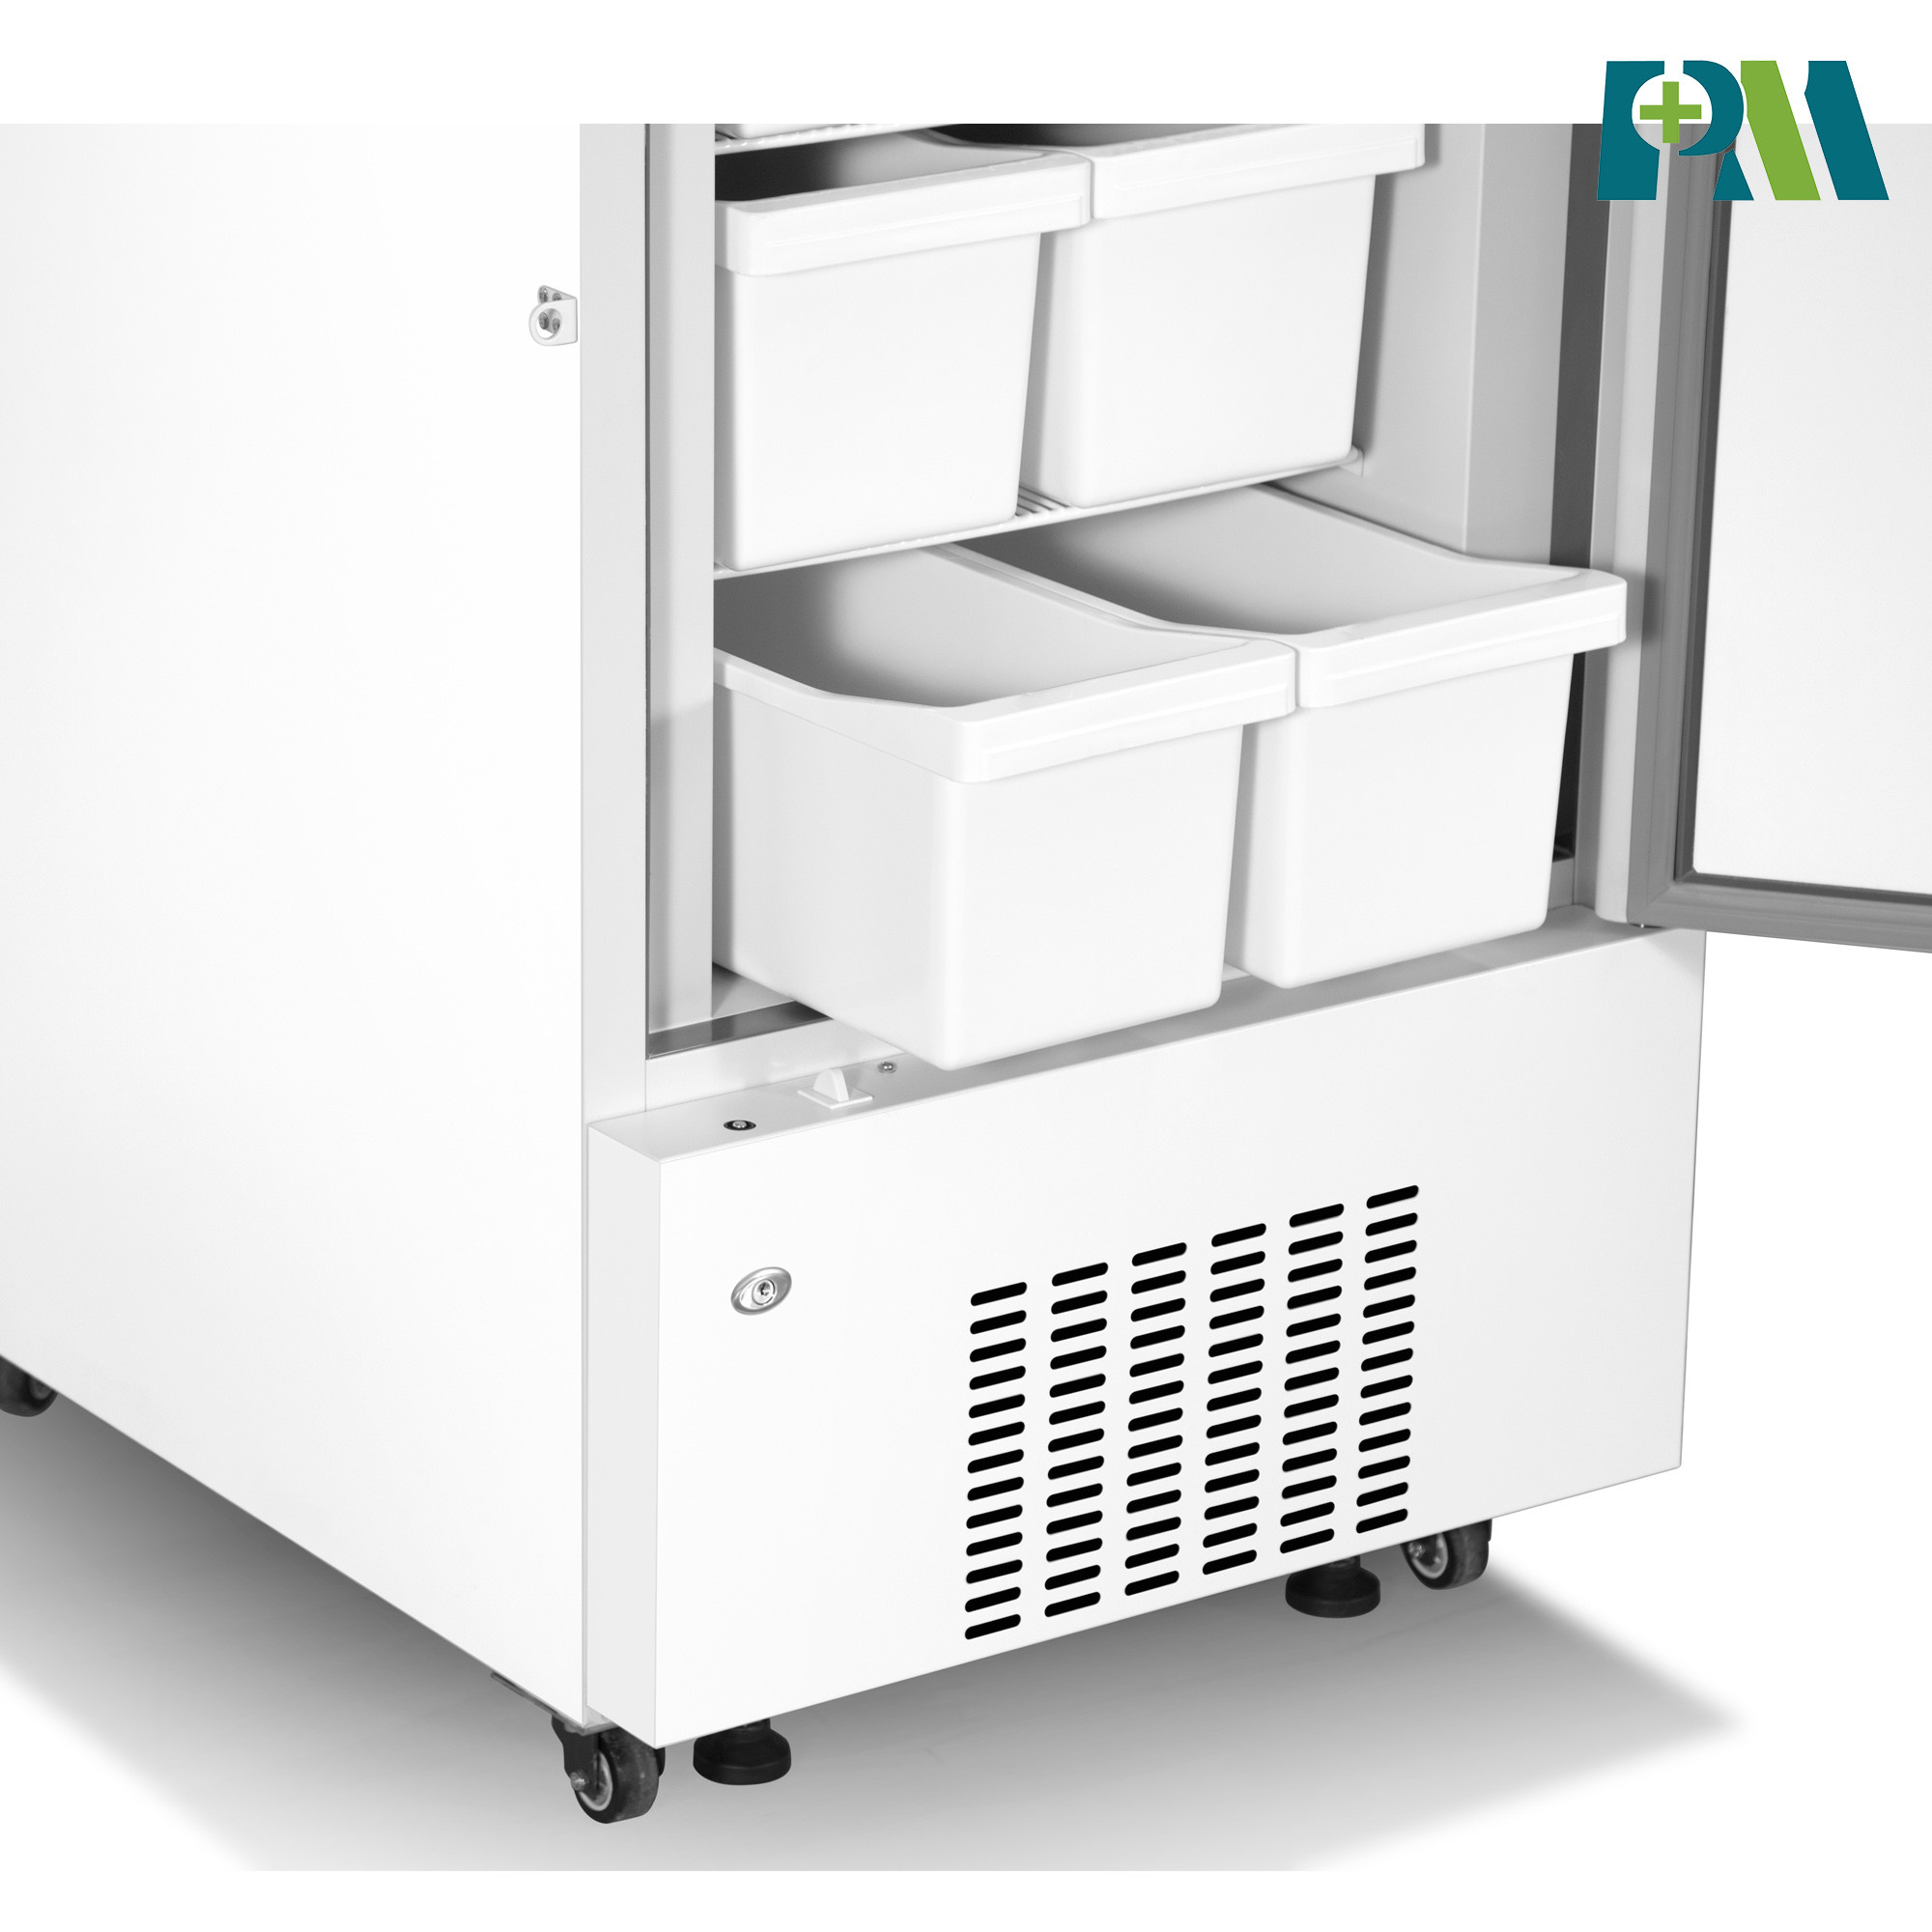 Energy Saving -40 Degrees 368L Steel Combi Medical Refrigerator With Drawers For Vaccine Storage